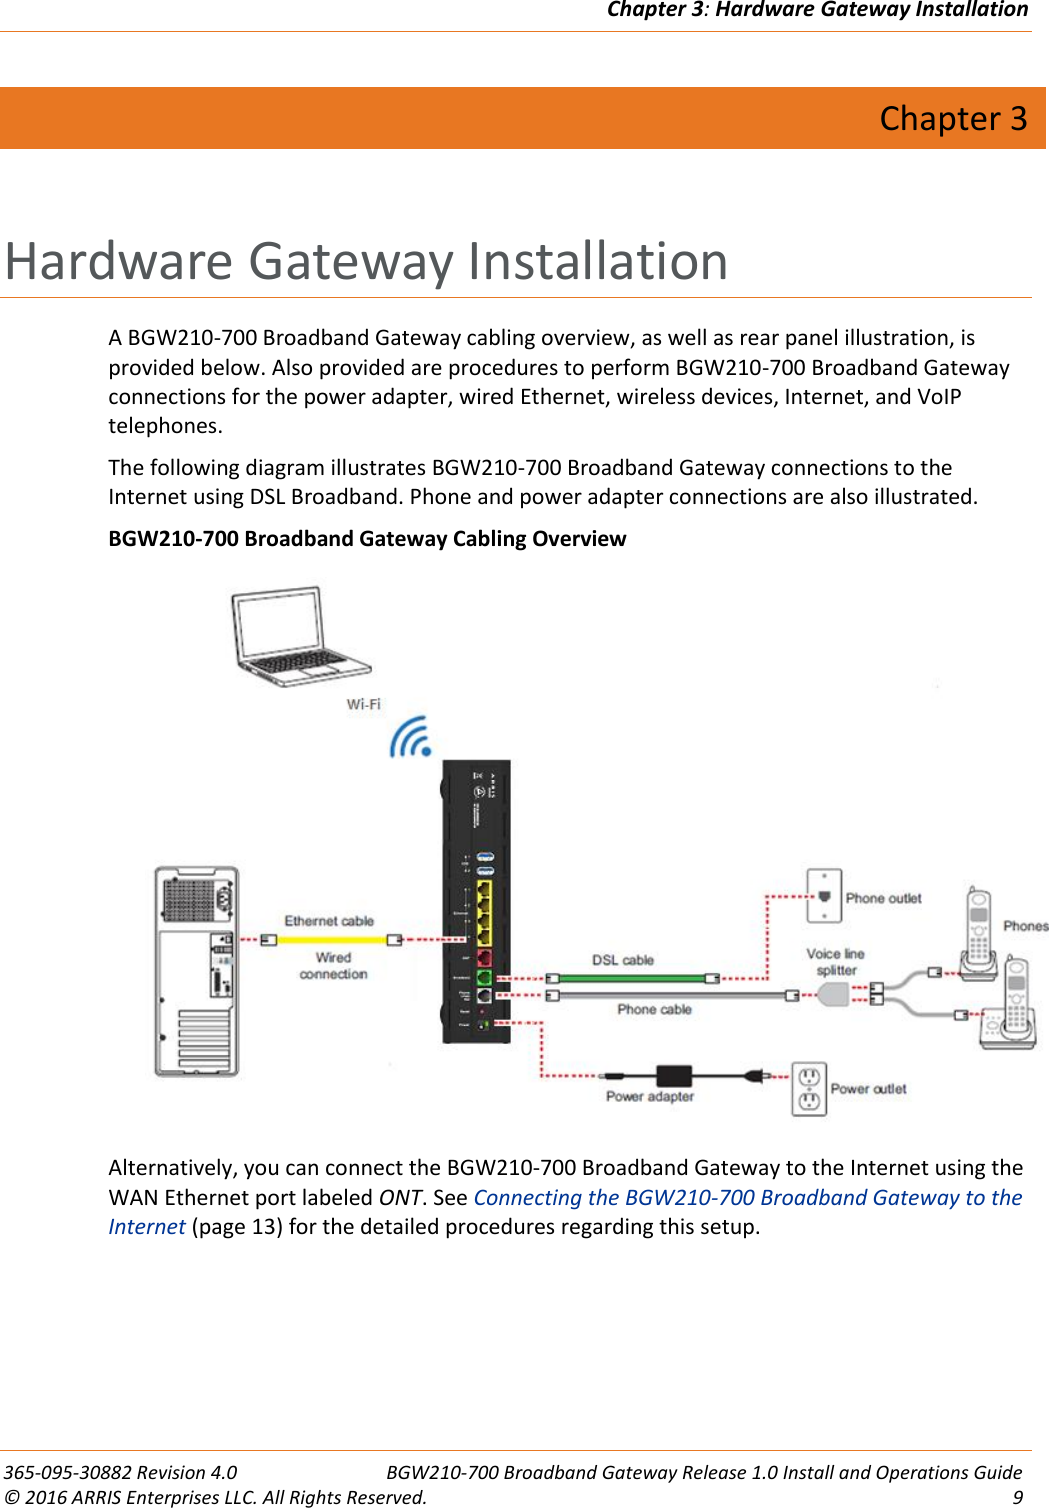 Chapter 3: Hardware Gateway Installation  365-095-30882 Revision 4.0  BGW210-700 Broadband Gateway Release 1.0 Install and Operations Guide © 2016 ARRIS Enterprises LLC. All Rights Reserved.  9   Chapter 3 Hardware Gateway Installation A BGW210-700 Broadband Gateway cabling overview, as well as rear panel illustration, is provided below. Also provided are procedures to perform BGW210-700 Broadband Gateway connections for the power adapter, wired Ethernet, wireless devices, Internet, and VoIP telephones. The following diagram illustrates BGW210-700 Broadband Gateway connections to the Internet using DSL Broadband. Phone and power adapter connections are also illustrated. BGW210-700 Broadband Gateway Cabling Overview  Alternatively, you can connect the BGW210-700 Broadband Gateway to the Internet using the WAN Ethernet port labeled ONT. See Connecting the BGW210-700 Broadband Gateway to the Internet (page 13) for the detailed procedures regarding this setup. 